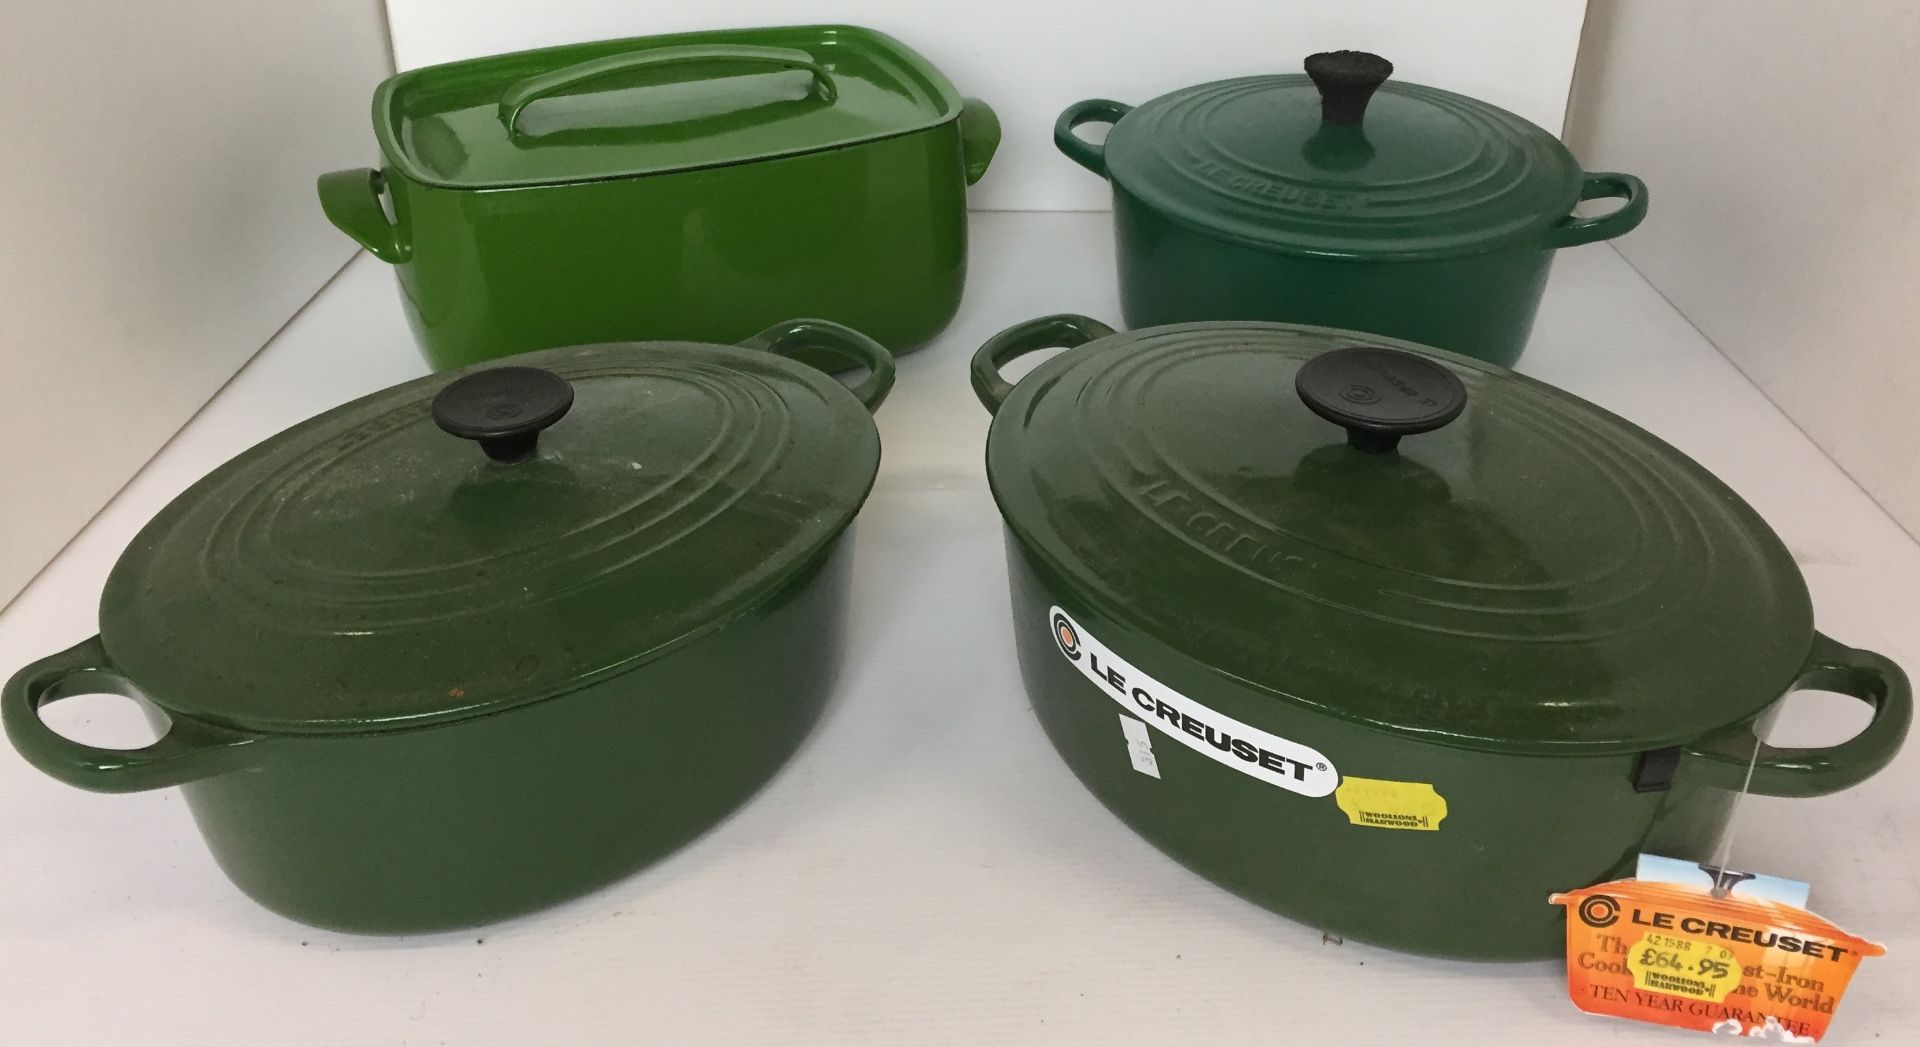 Four pieces of green enamelled cast iron oven to tableware - Le Creuset oval casseroles sizes 27